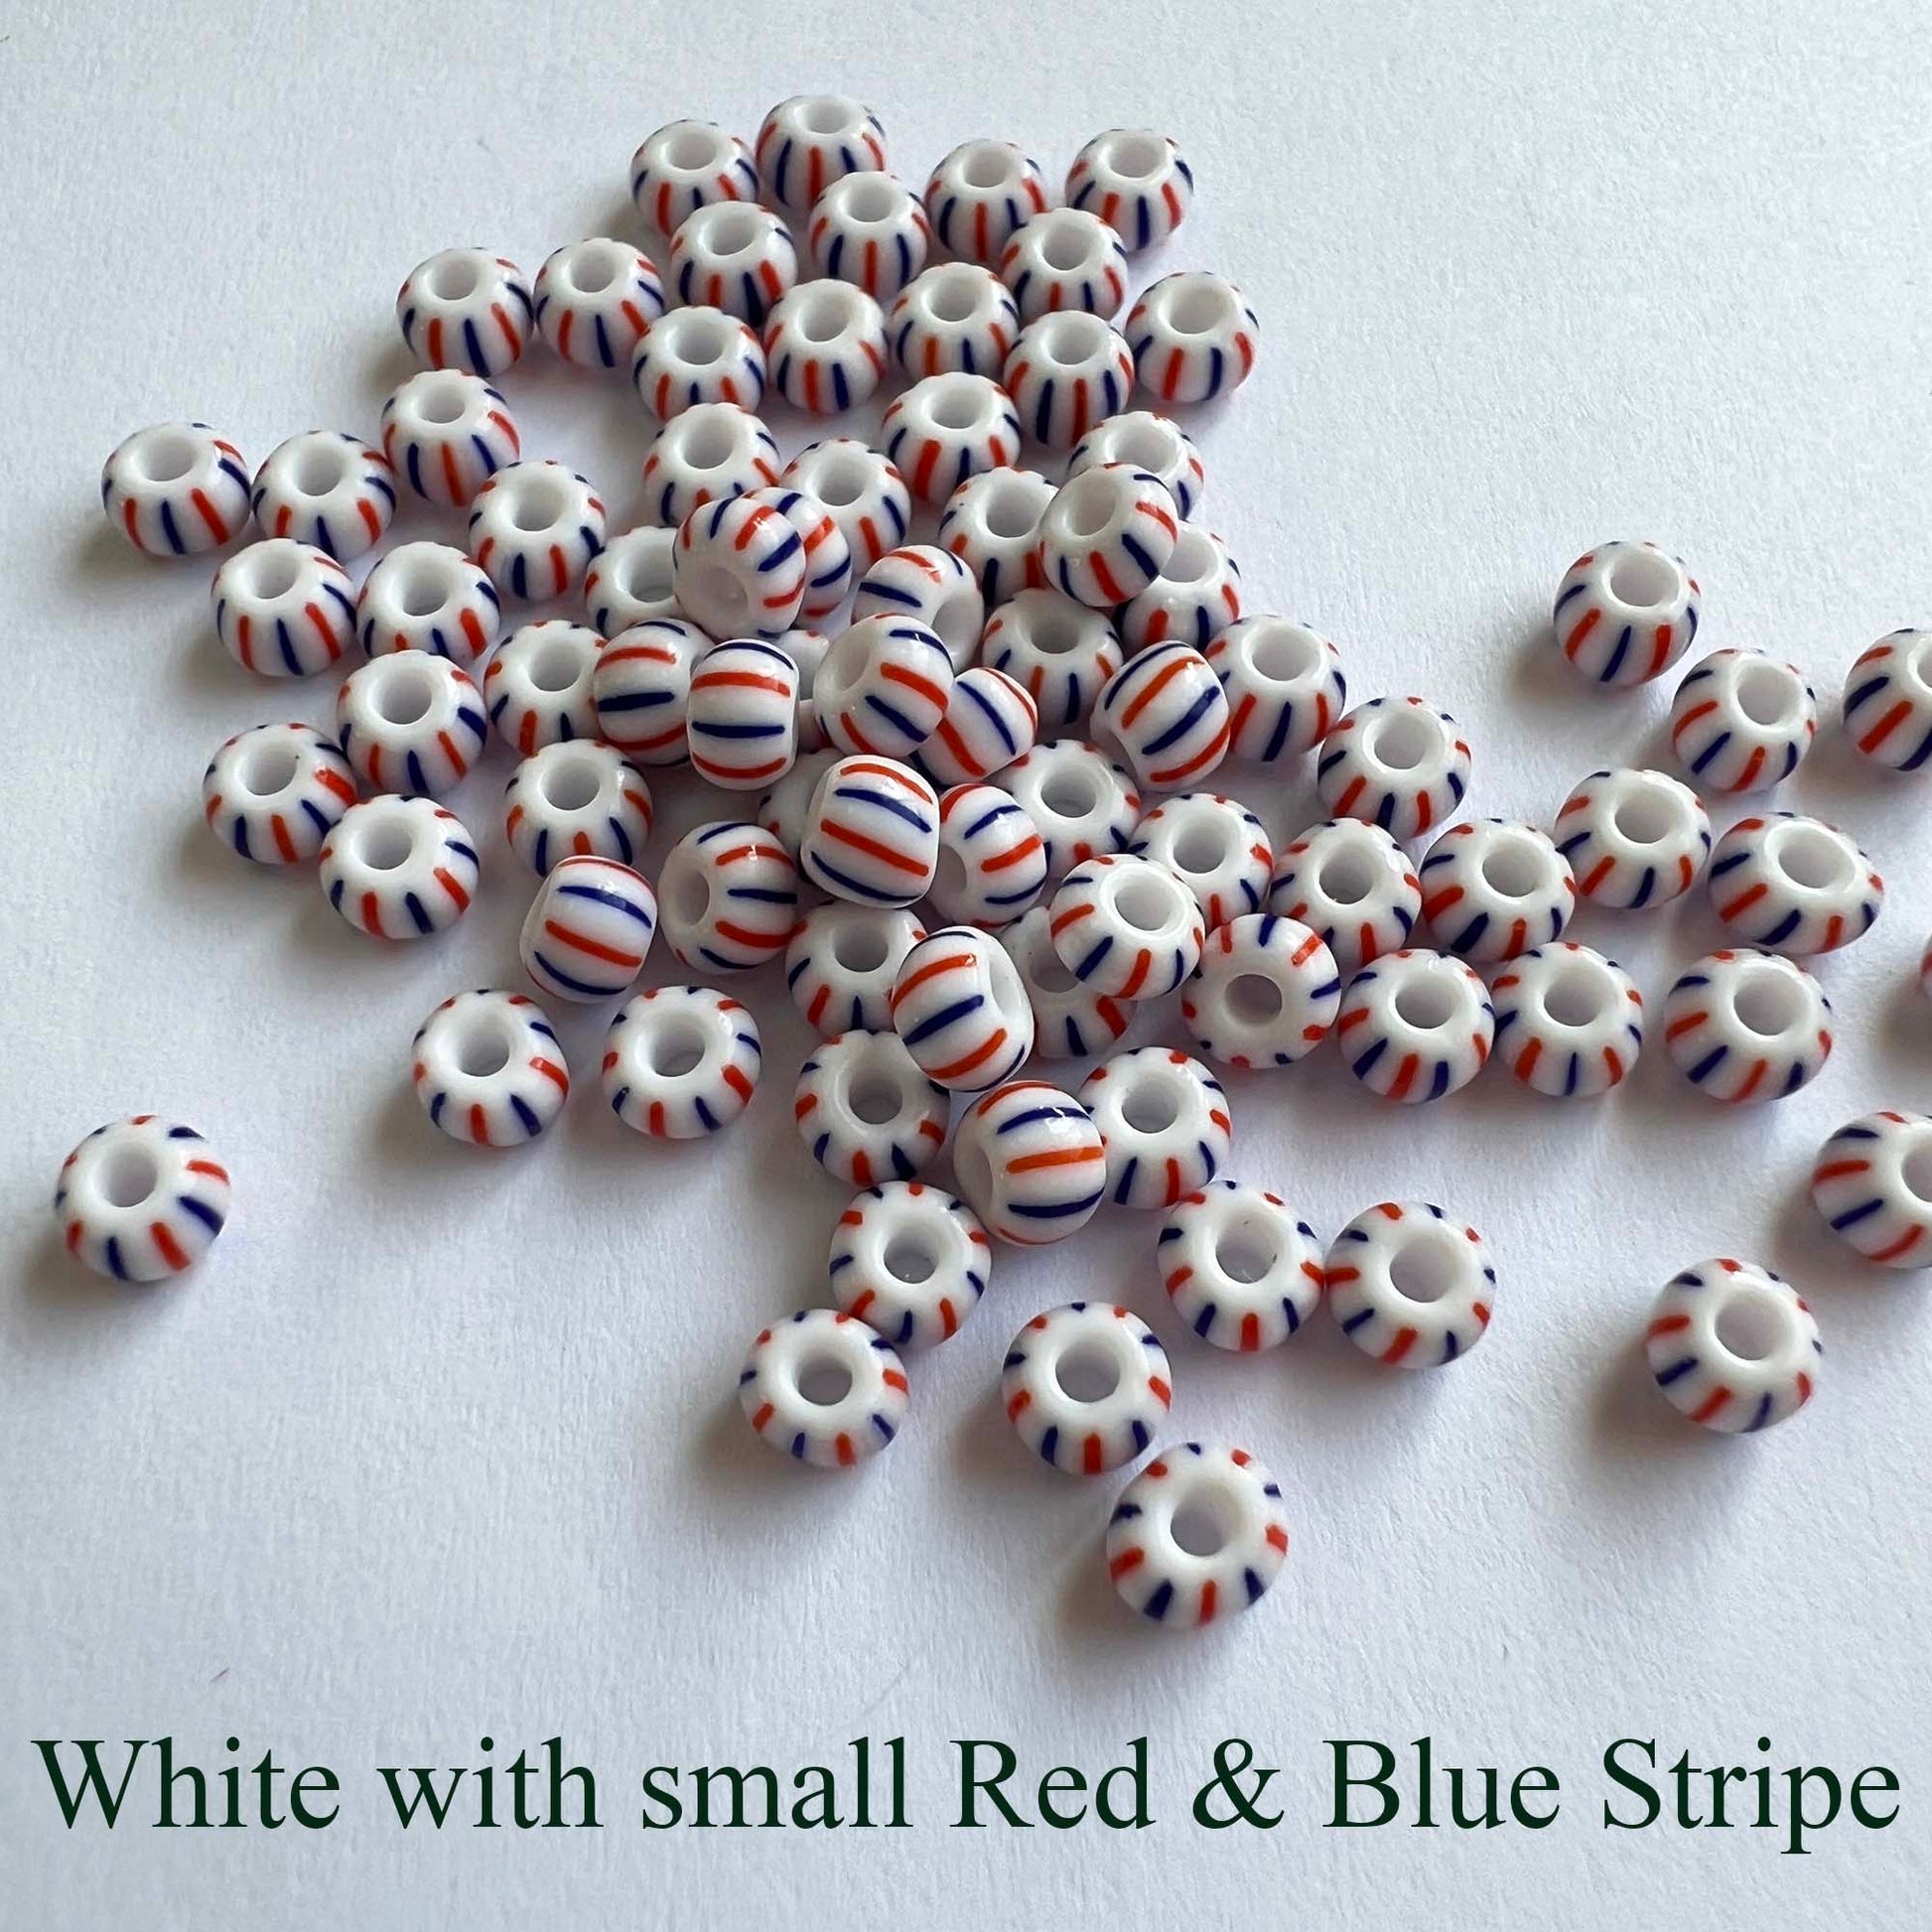 Striped Seed Beads Sizes 10 and 11